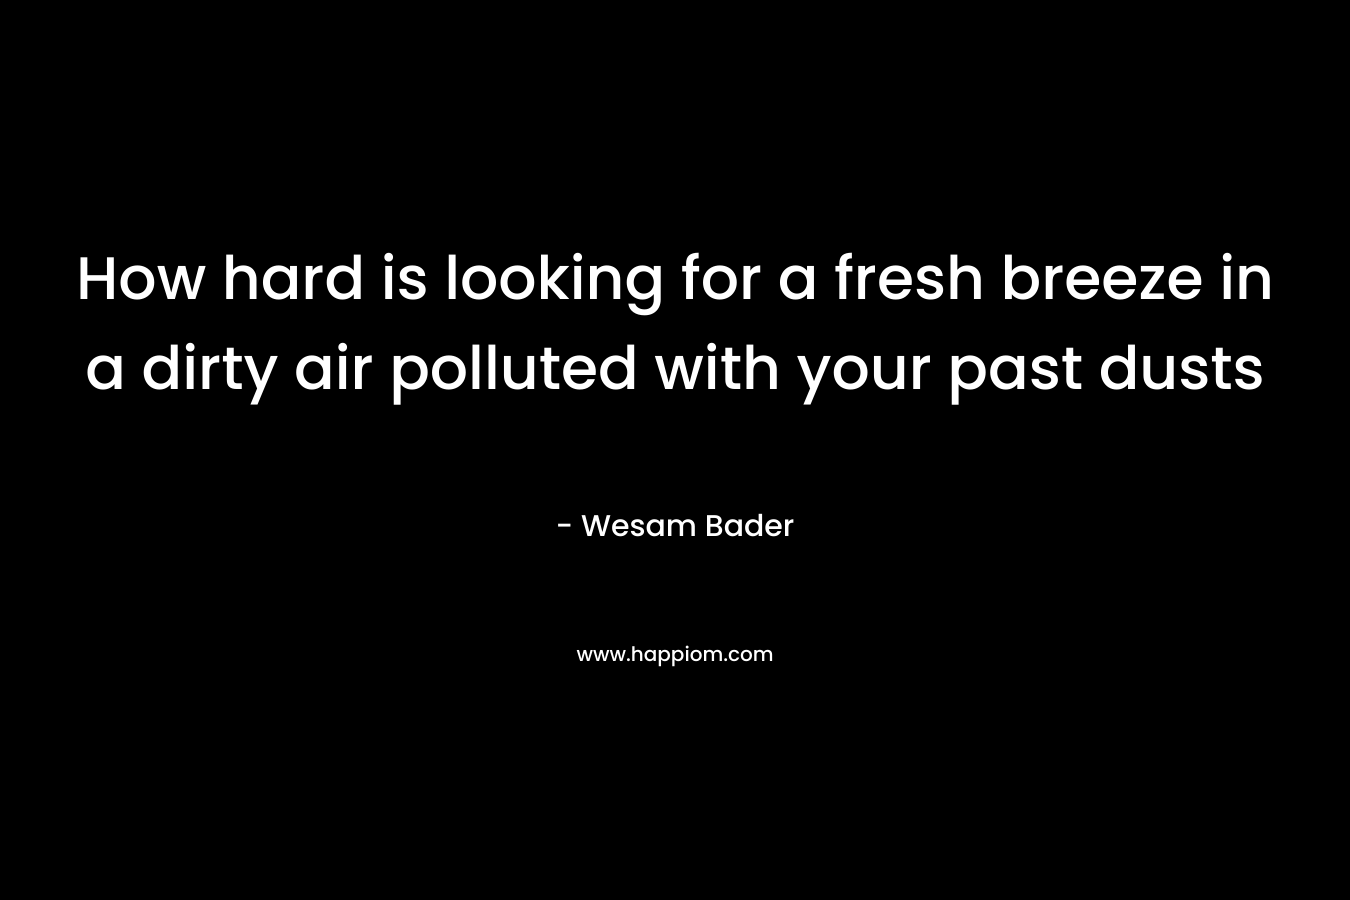 How hard is looking for a fresh breeze in a dirty air polluted with your past dusts – Wesam Bader